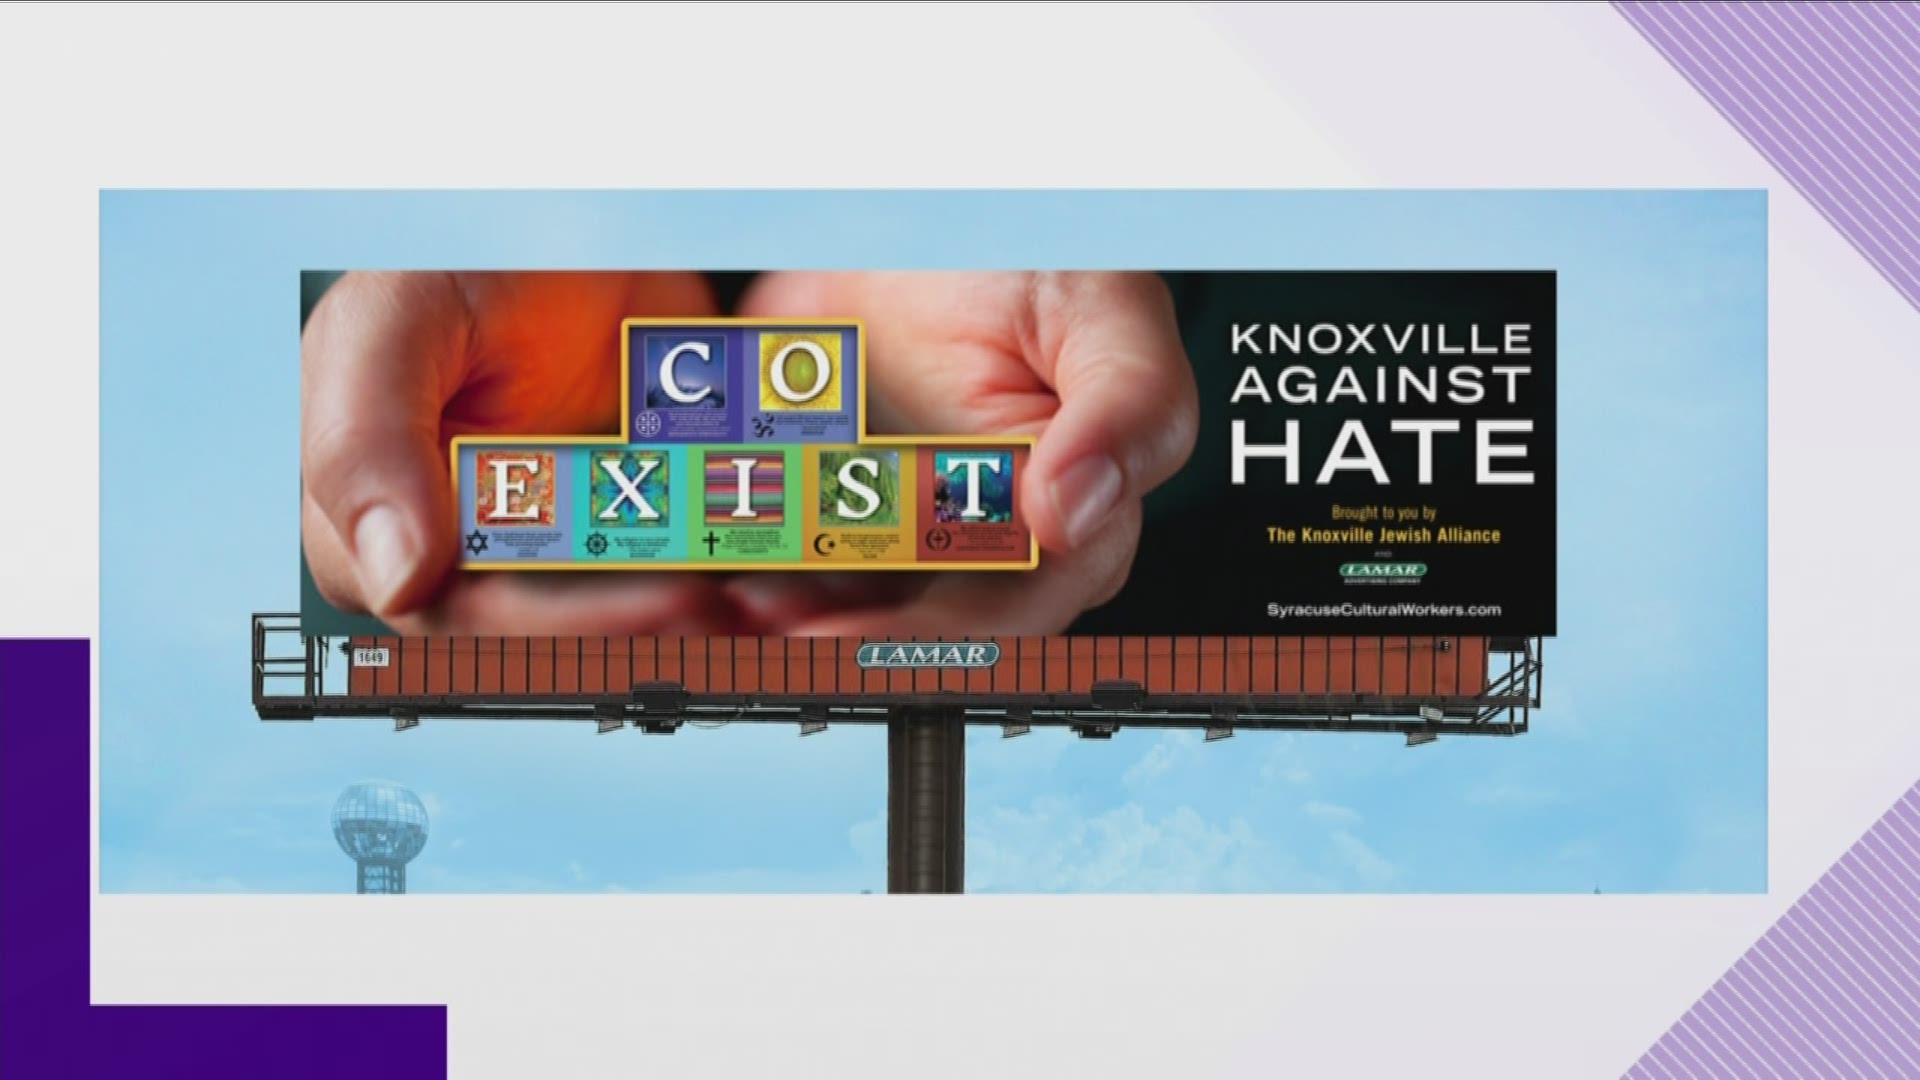 The Knoxville Jewish Alliance has initiated a "Knoxville Against Hate" campaign in response to a spate of hateful speech being spray painted at 'The Rock'.